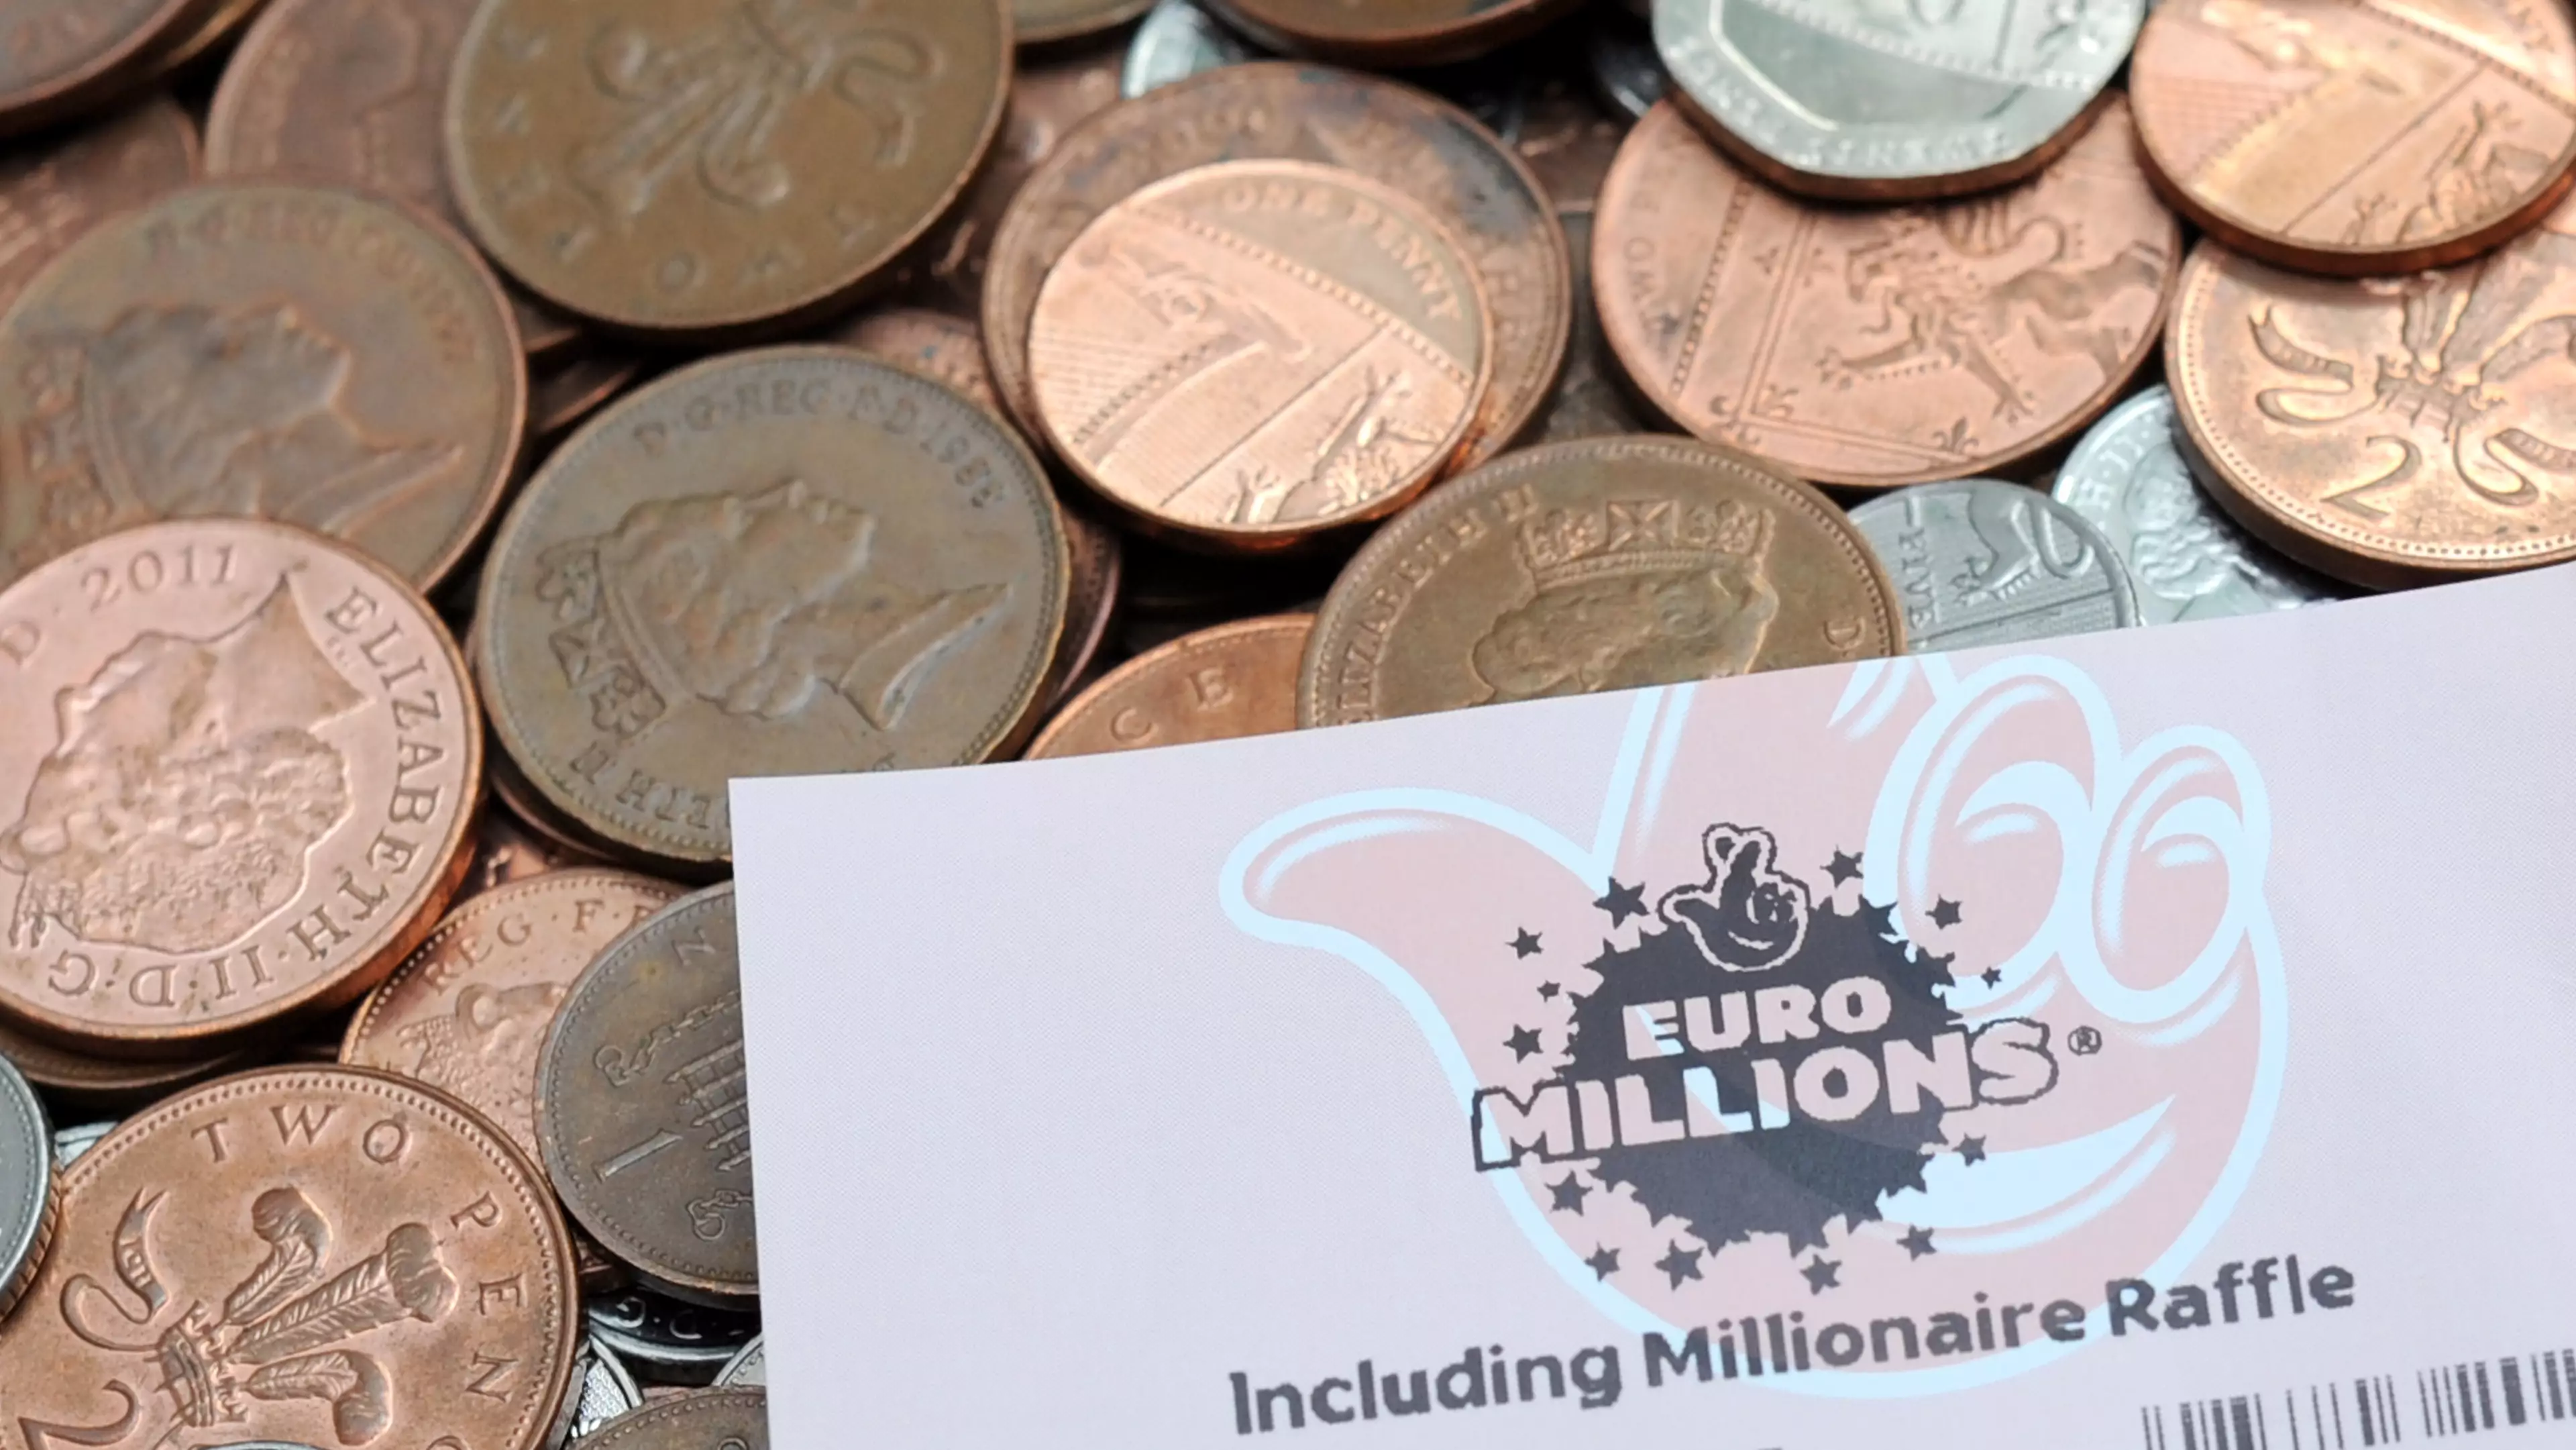 EuroMillions £175 Million Jackpot Is Highest Ever Ahead Of Tuesday's Draw